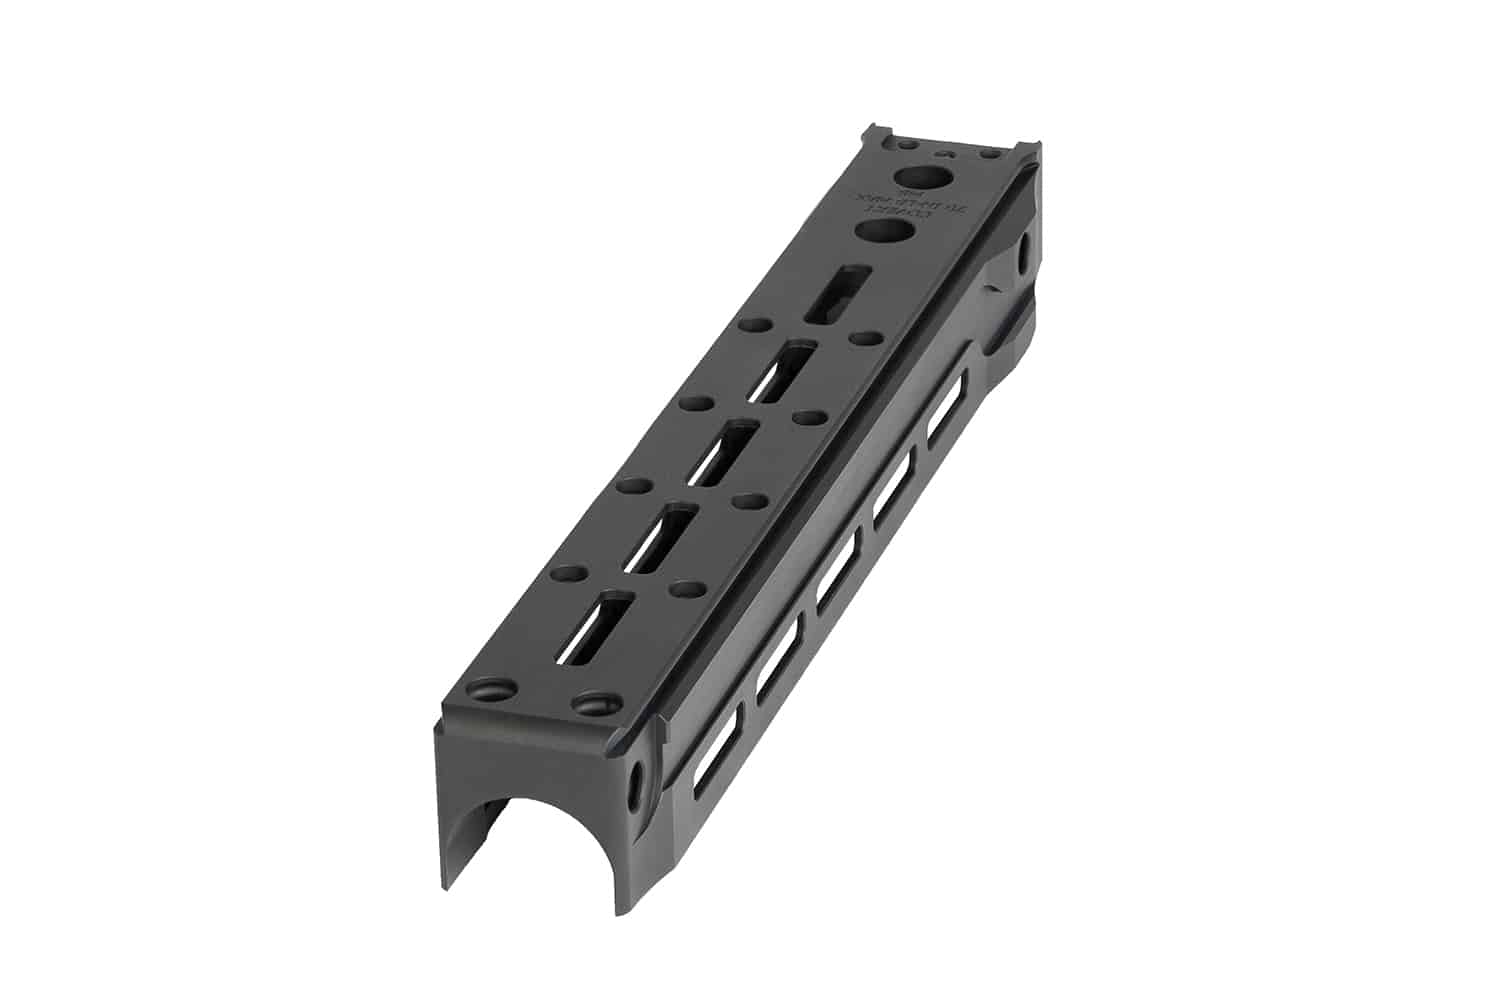 Vision chassis covert forend